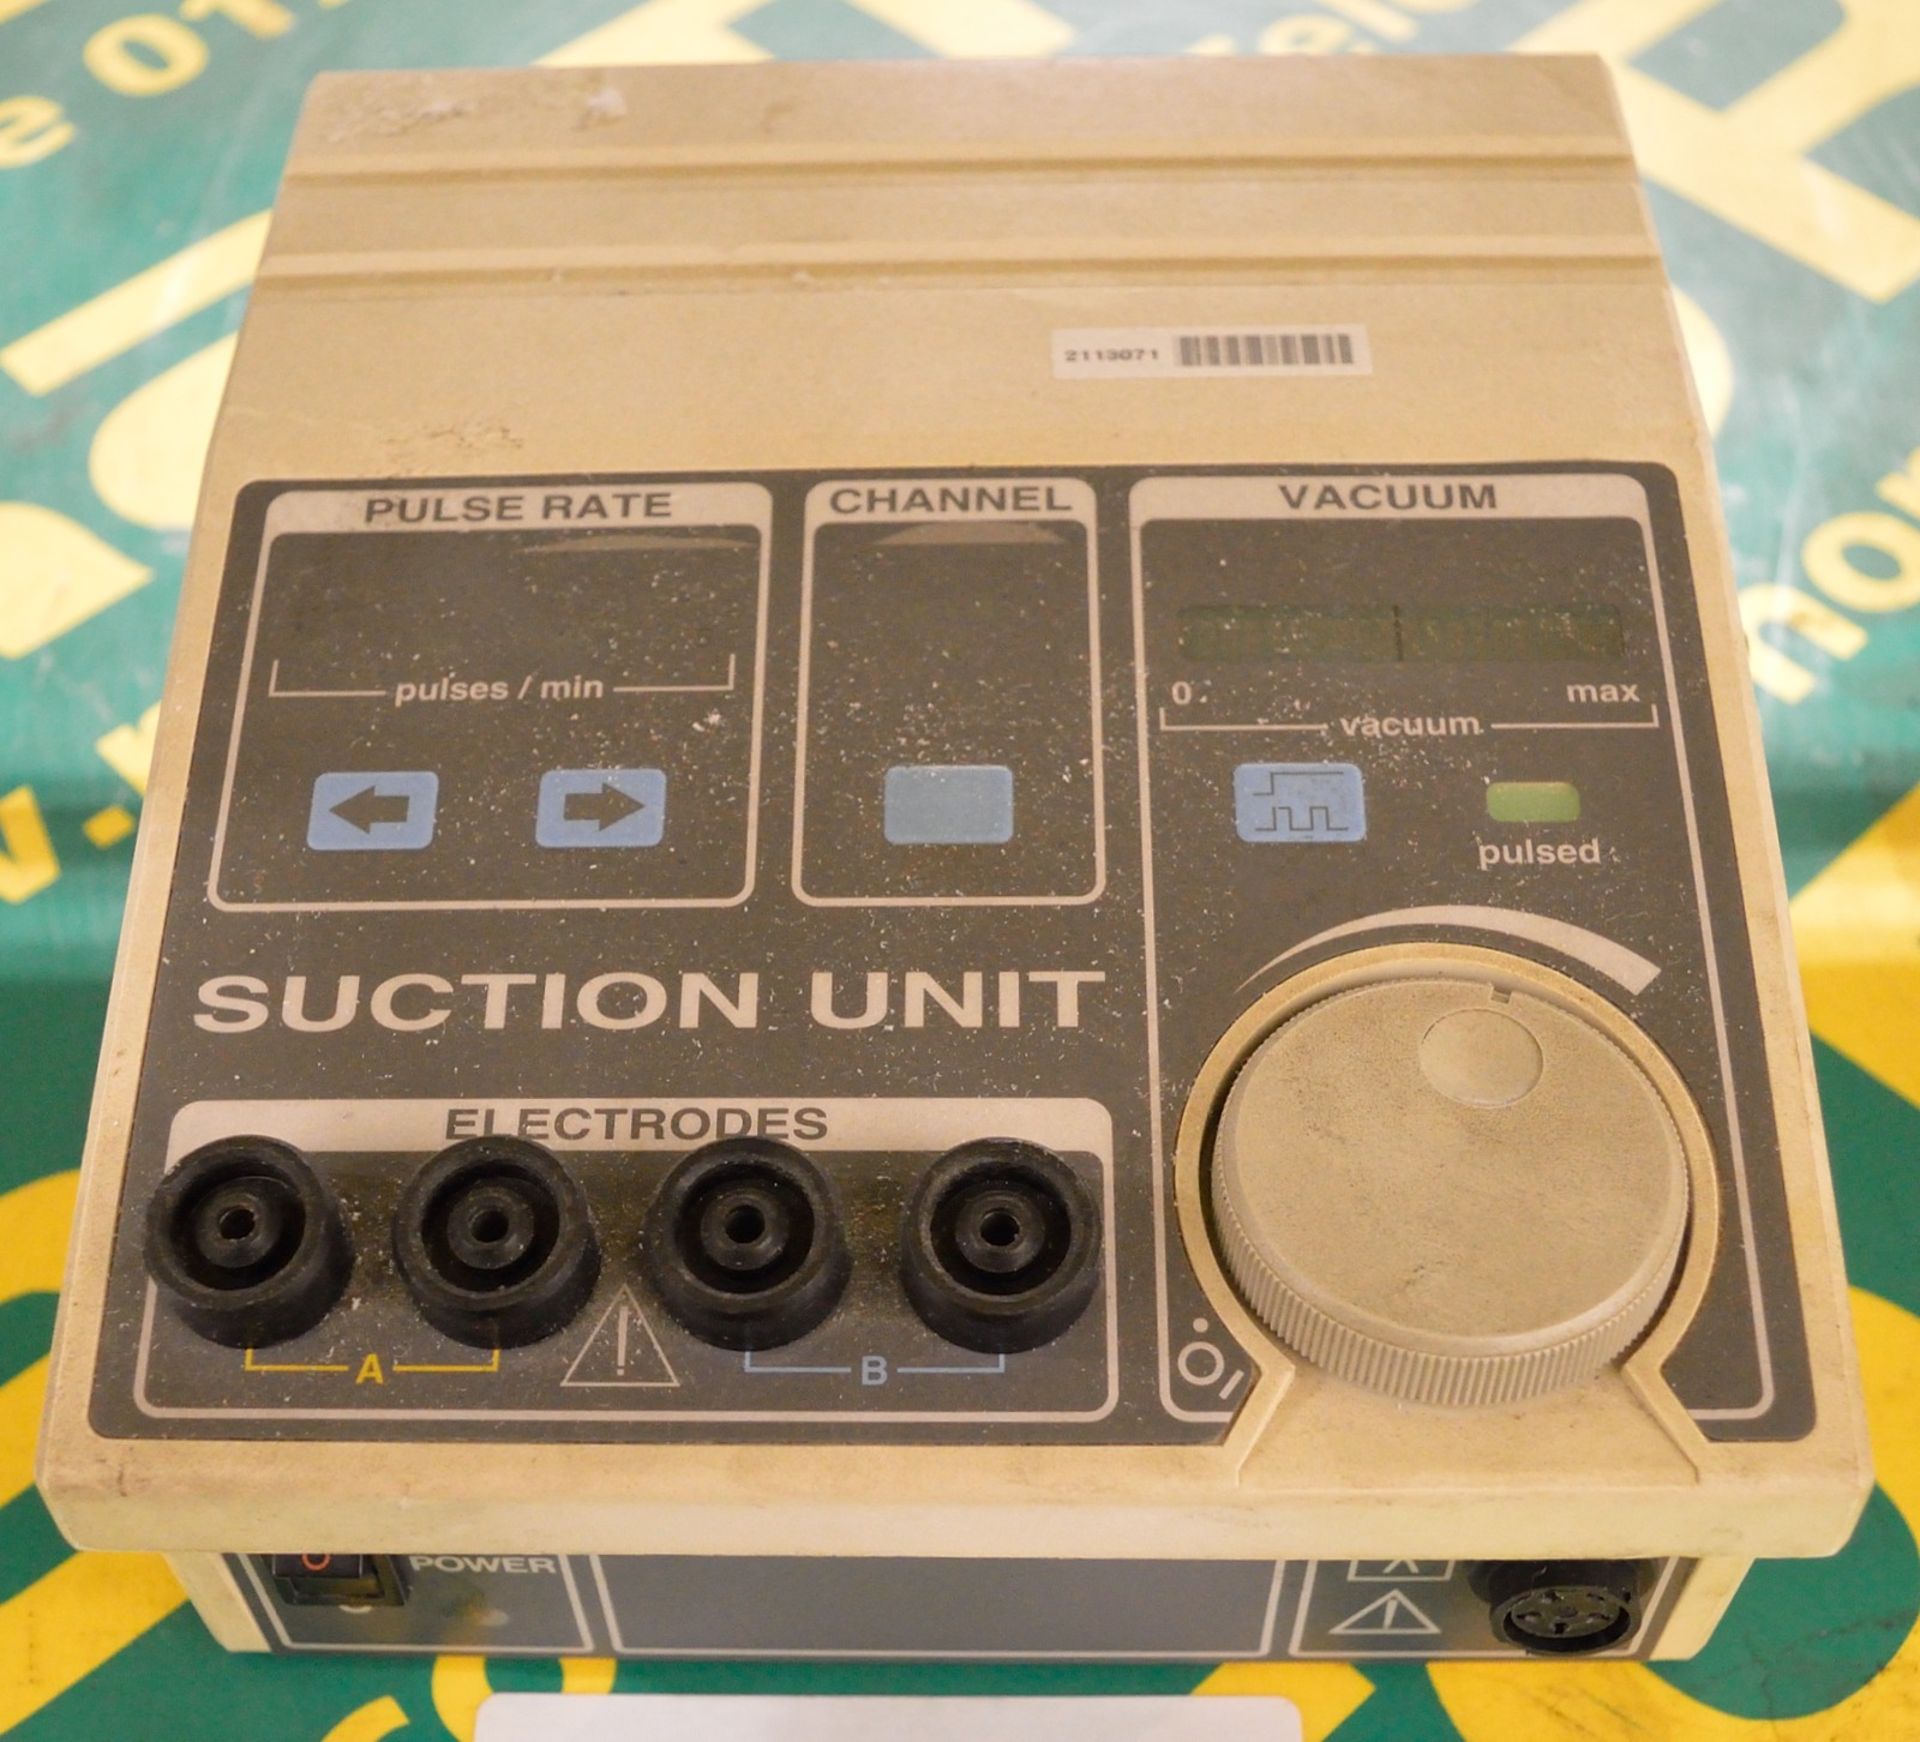 Electro-Medical Supplies Suction Unit Model 69.